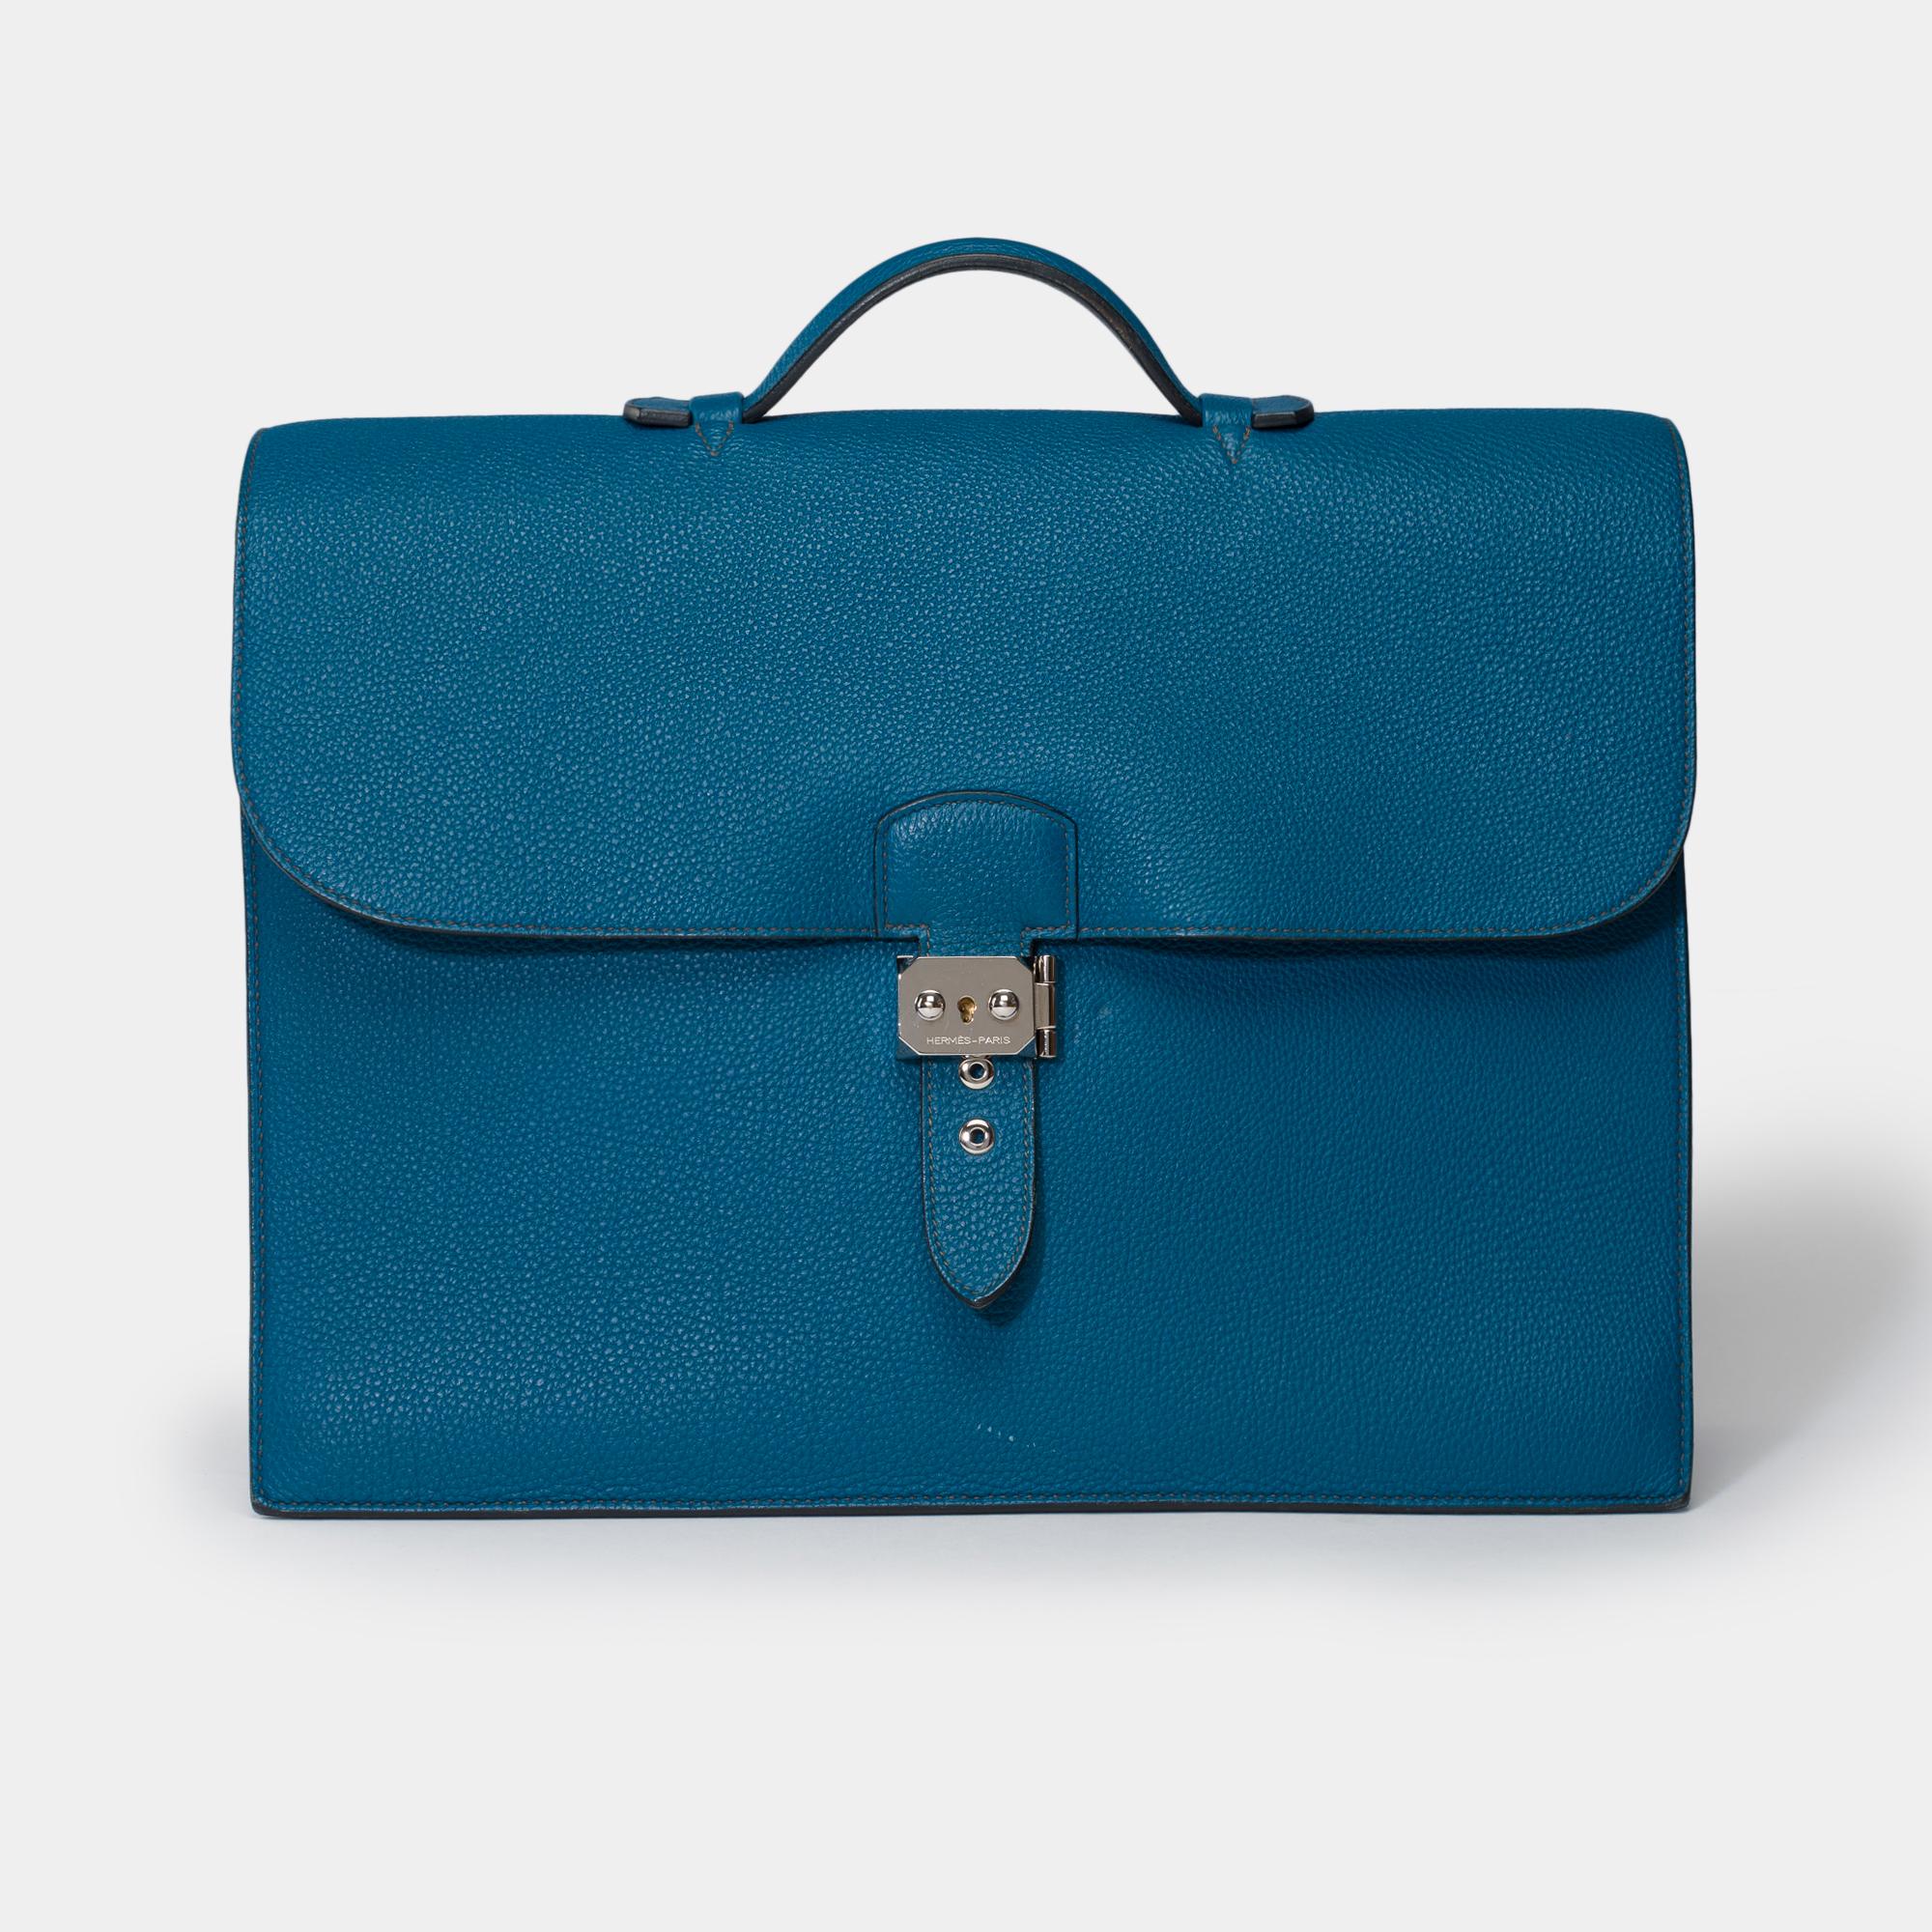 Splendid​ ​and​ ​very​ ​chic​ ​Hermès​ ​Sac​ ​à​ ​dépêches​ ​Briefcase​ ​in​ ​blue​ ​Togo​ ​leather​ ​,​ ​palladium​ ​silver​ ​metal​ ​trim,​ ​simple​ ​handle​ ​in​ ​blue​ ​leather​ ​allowing​ ​a​ ​hand​ ​carry

Closure​ ​by​ ​tilting​ ​latch​ ​on​